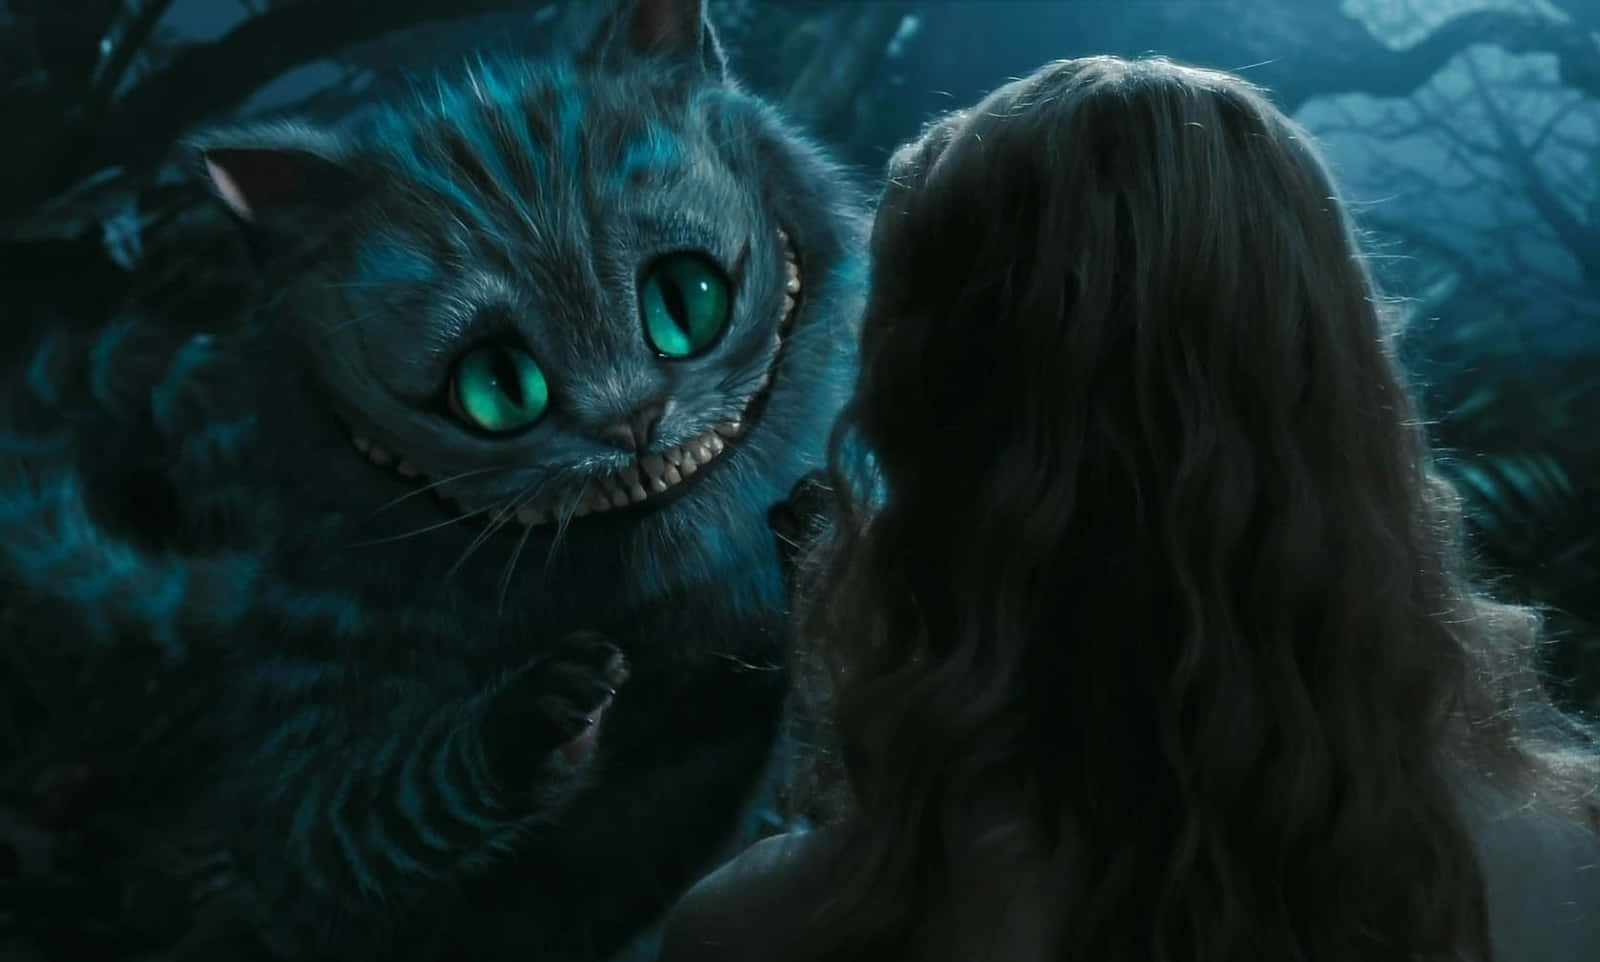 The Wise Cheshire Cat